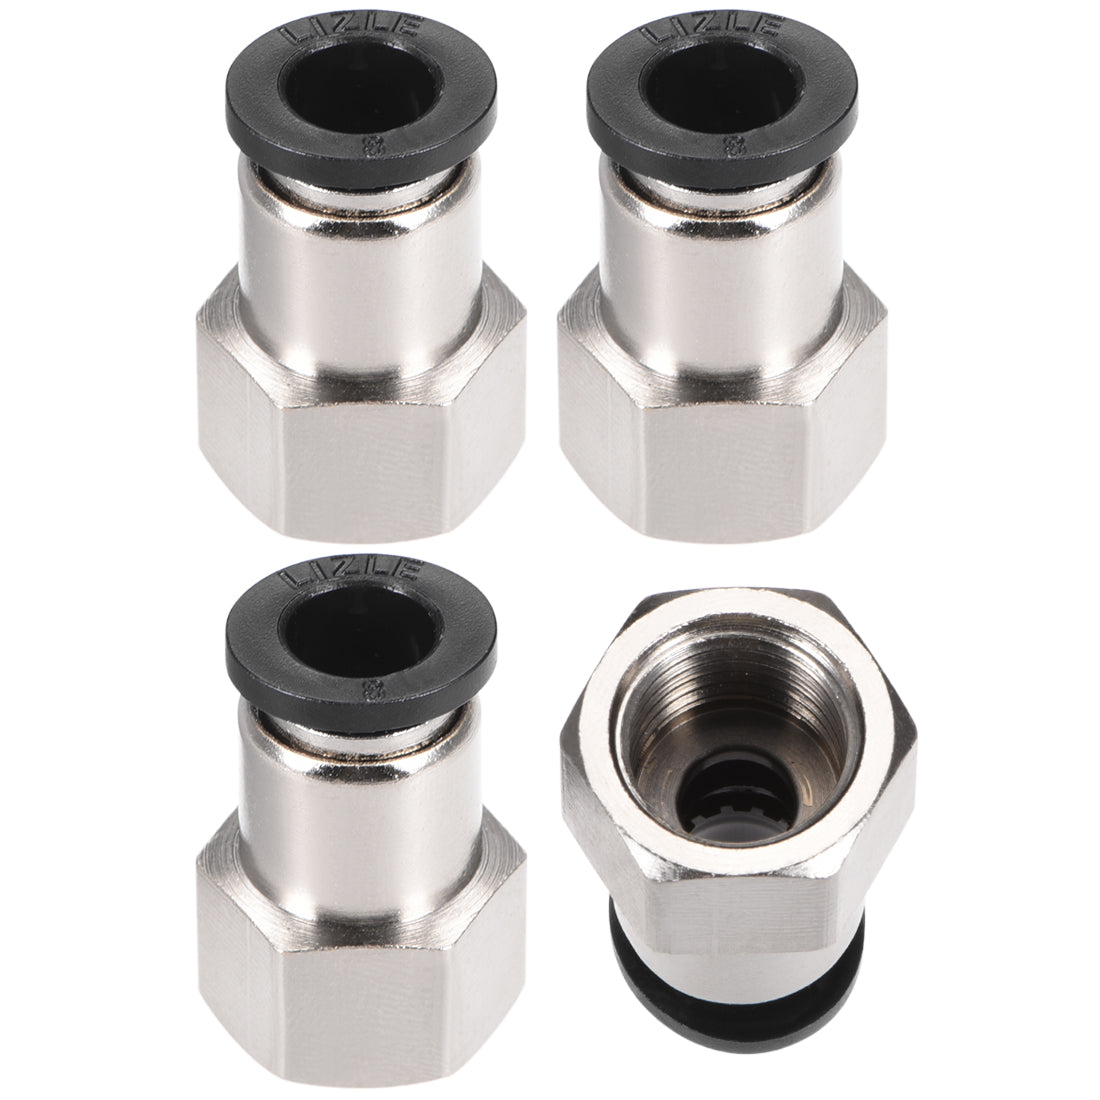 uxcell Uxcell Push to Connect Tube Fitting Adapter 8mm OD x G1/4" Female Silver Tone 4pcs